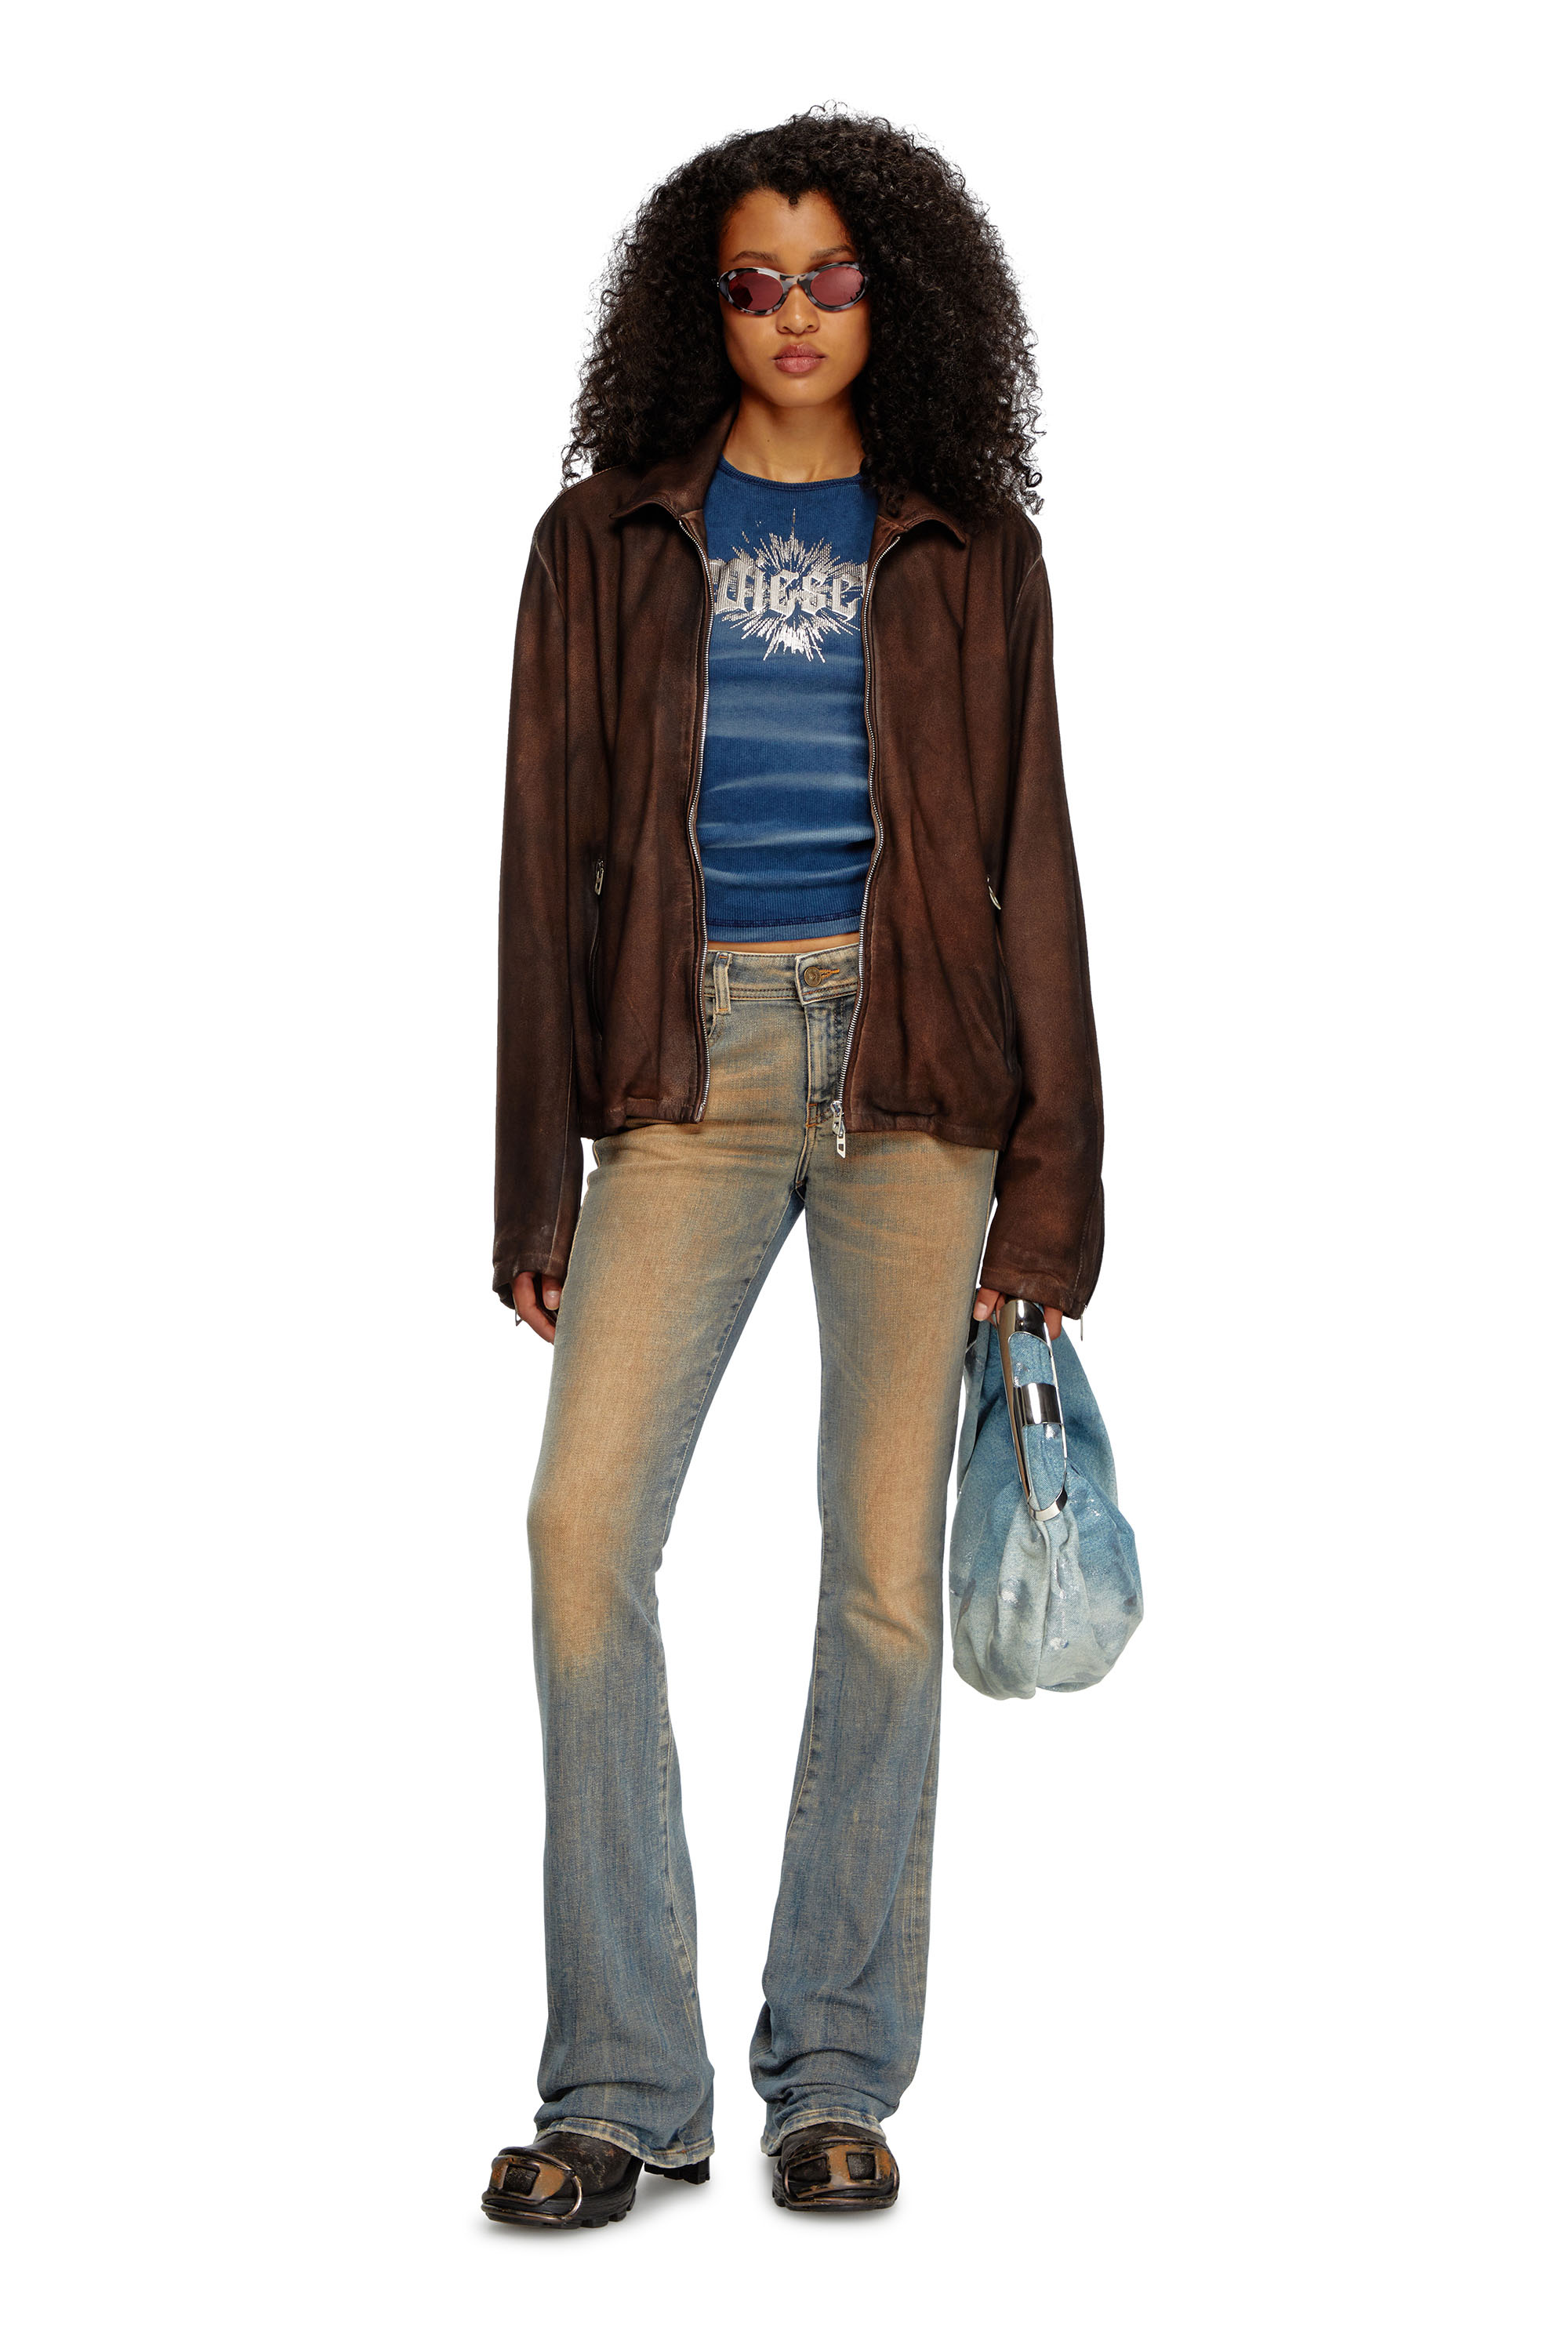 Diesel - Bootcut and Flare Jeans 1969 D-Ebbey 09J23, Mujer Bootcut y Flare Jeans - 1969 D-Ebbey in Azul marino - Image 5